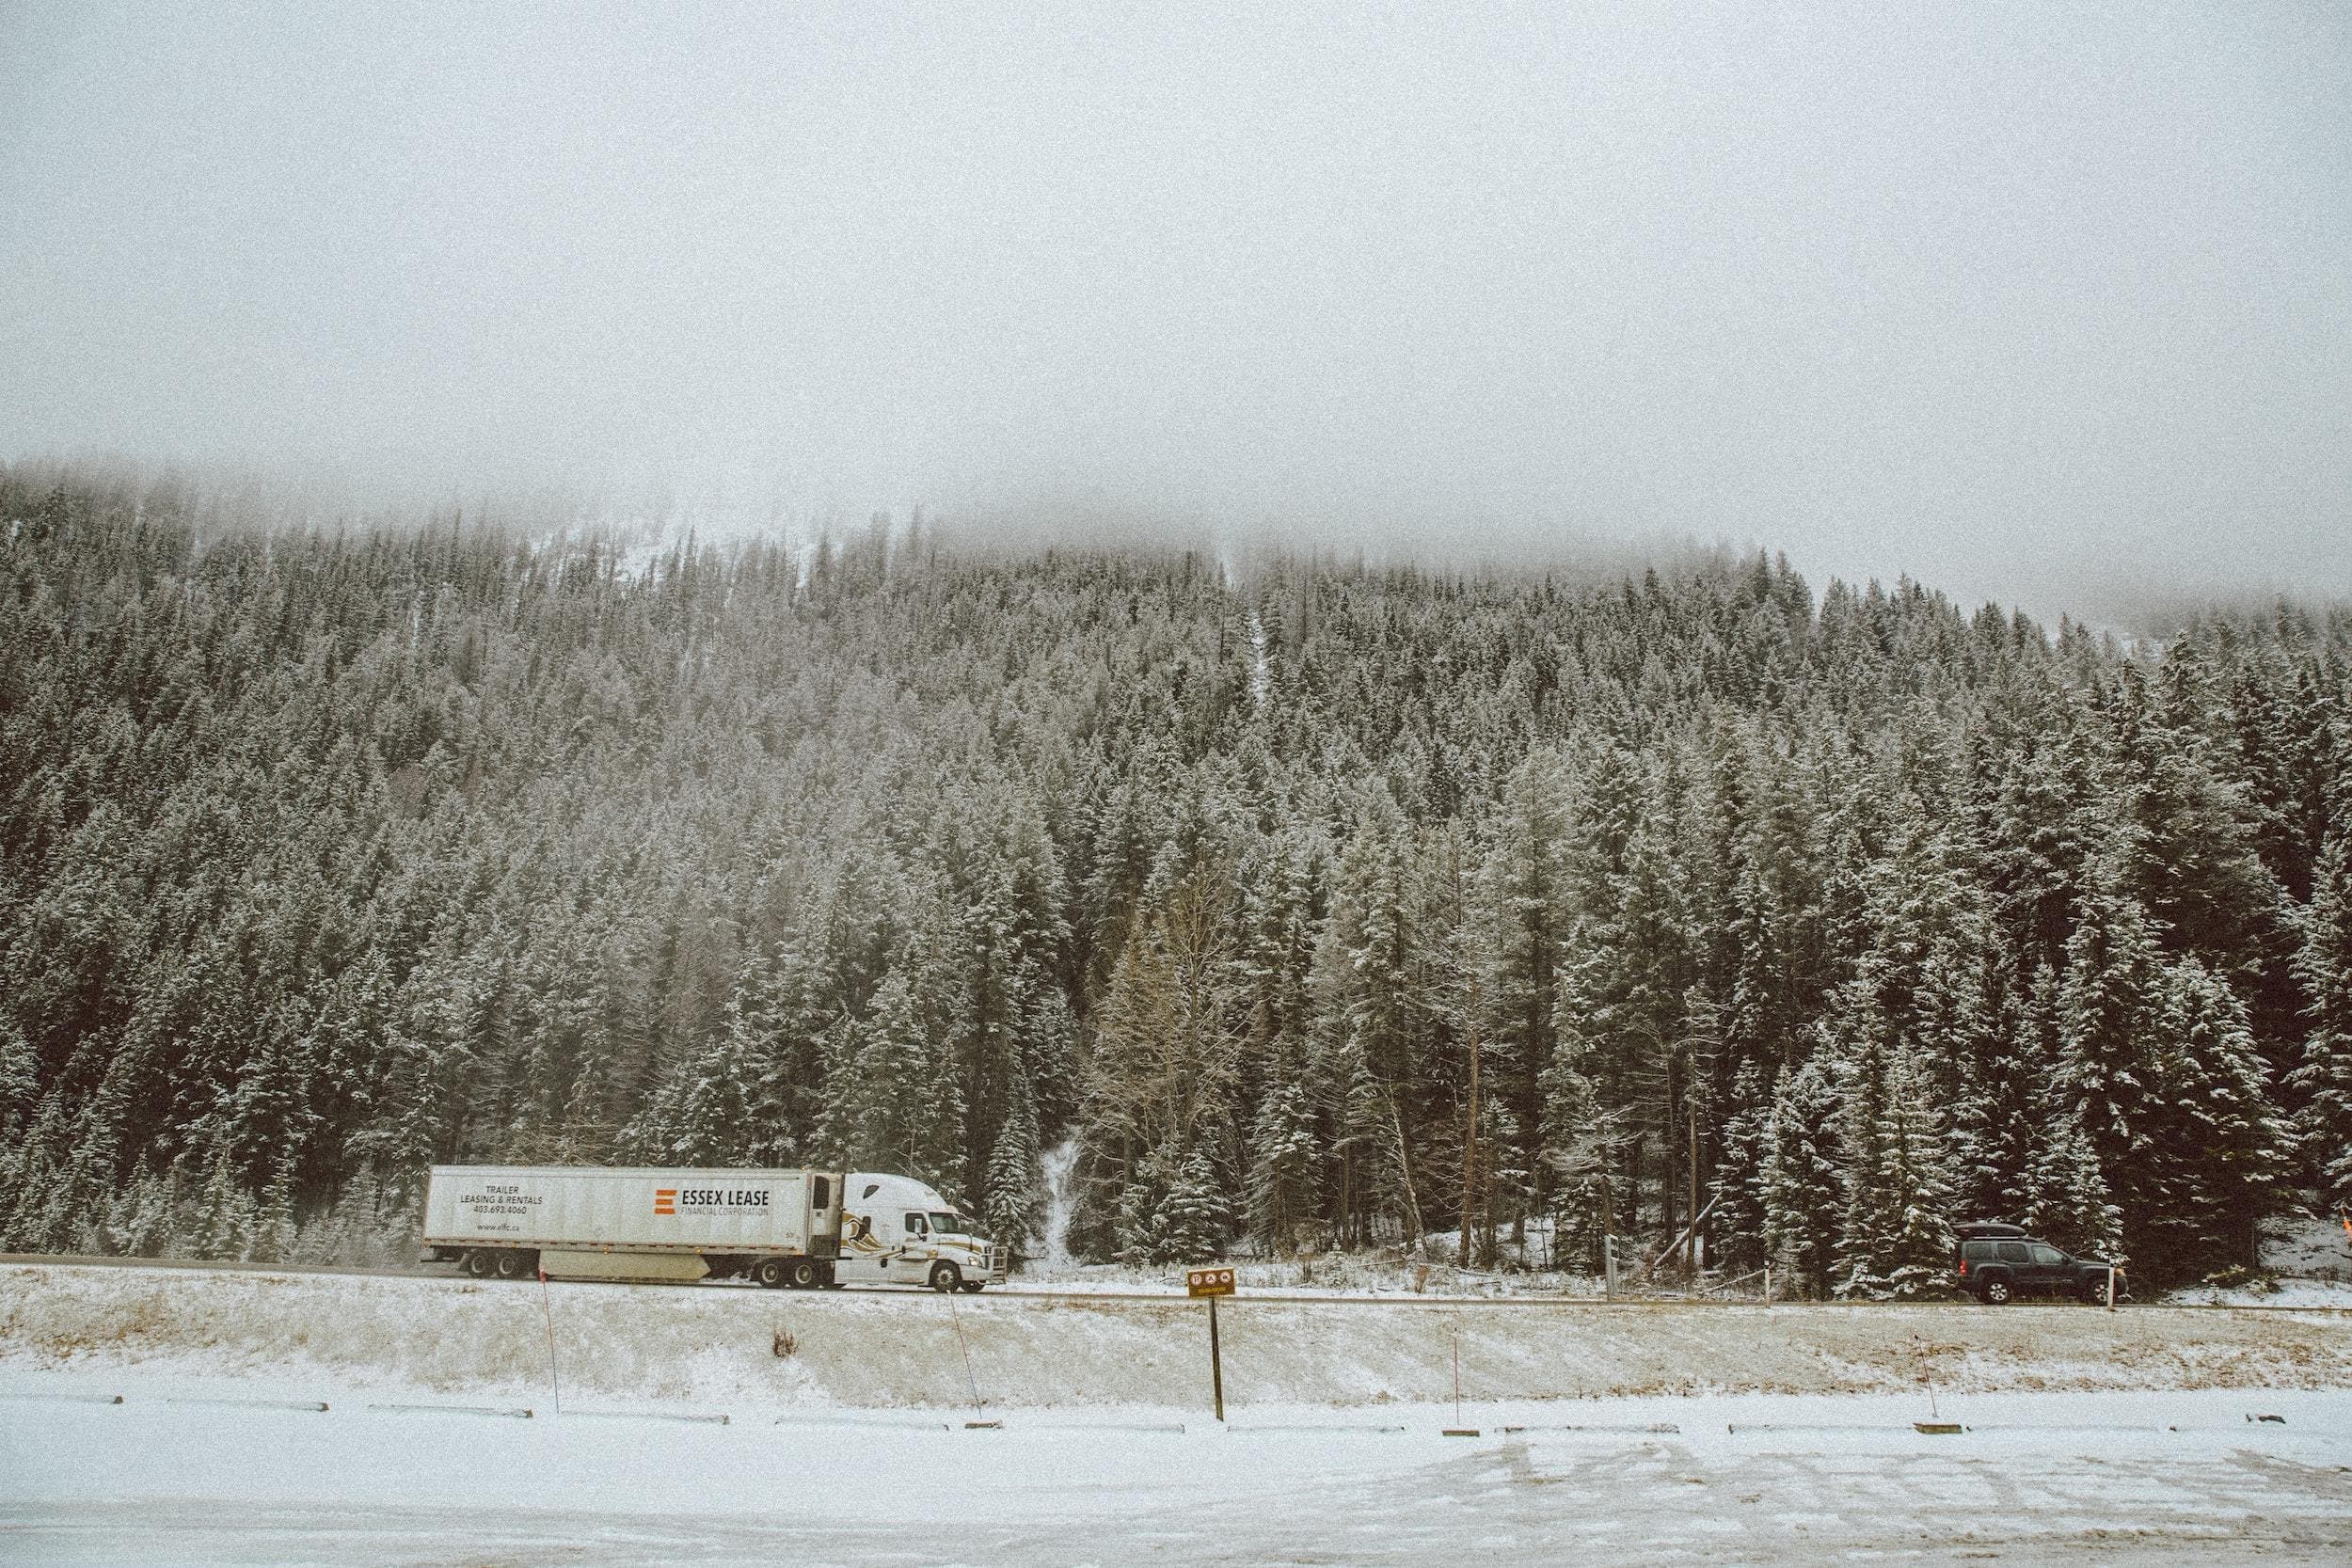 Truck on a road in the snow with a forest behind it